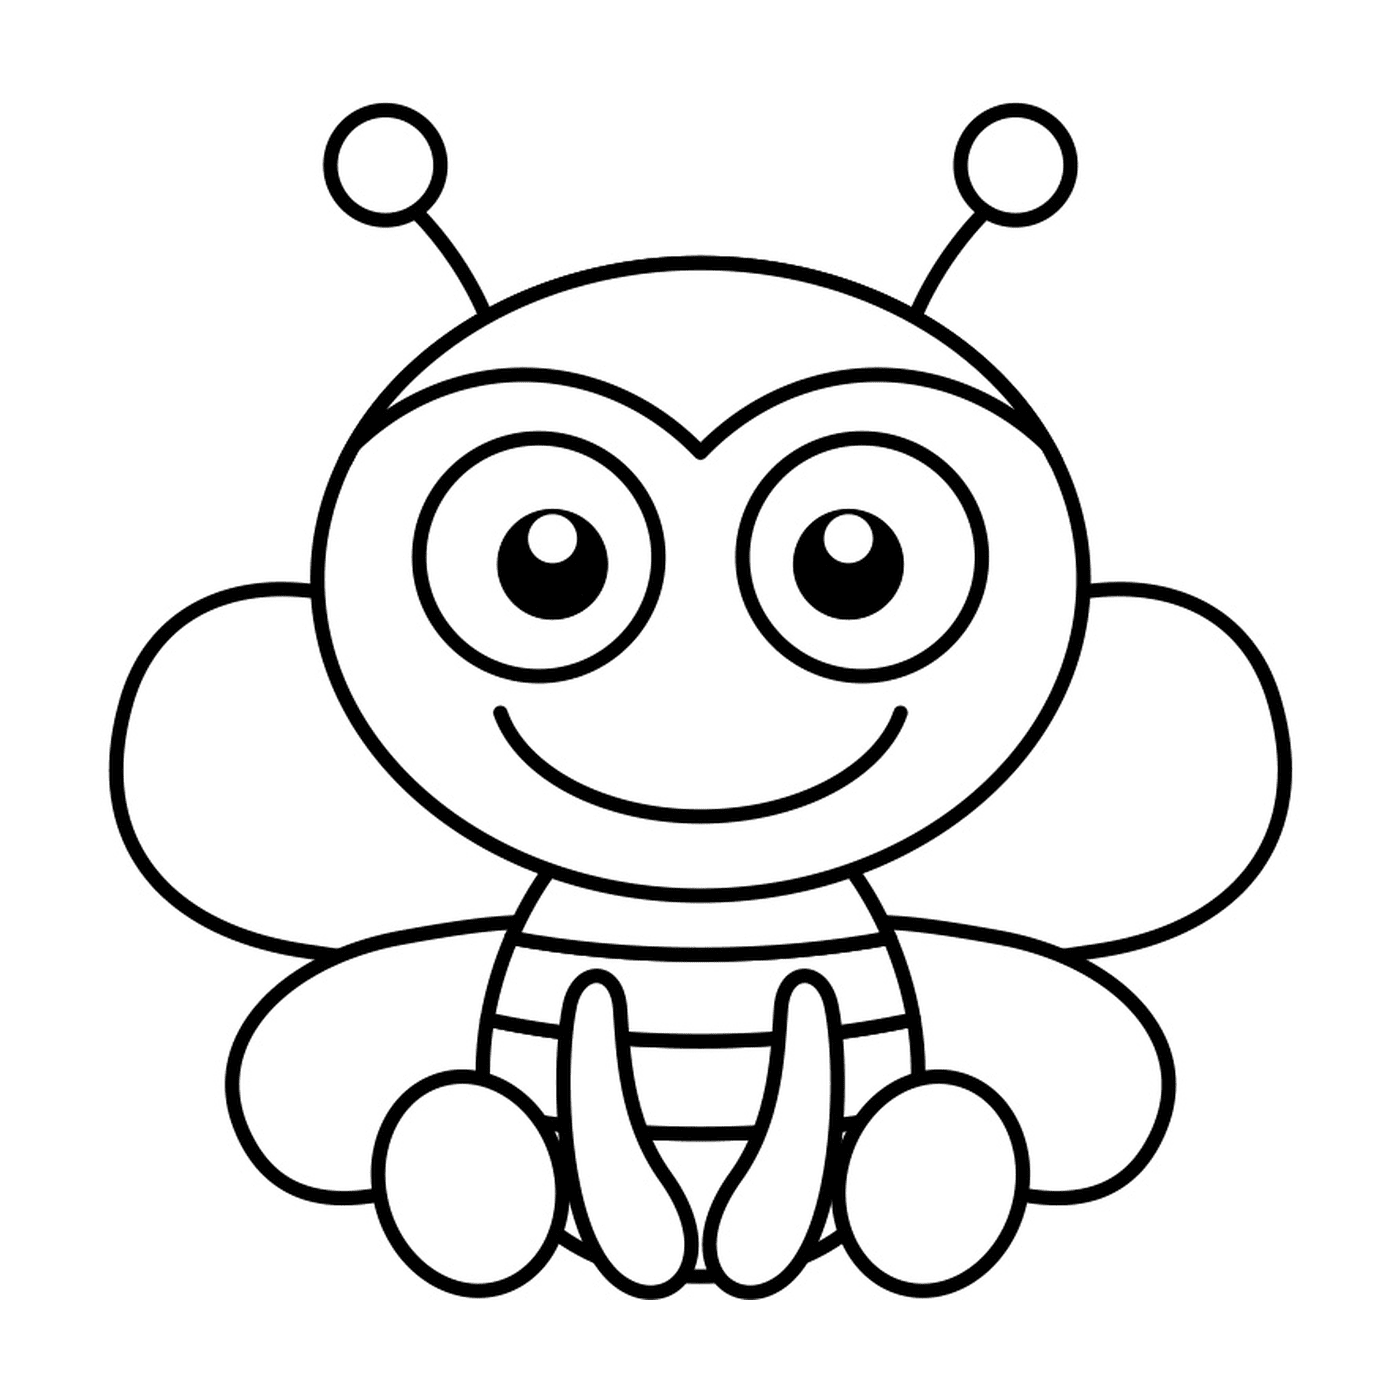  An easy to draw bee 